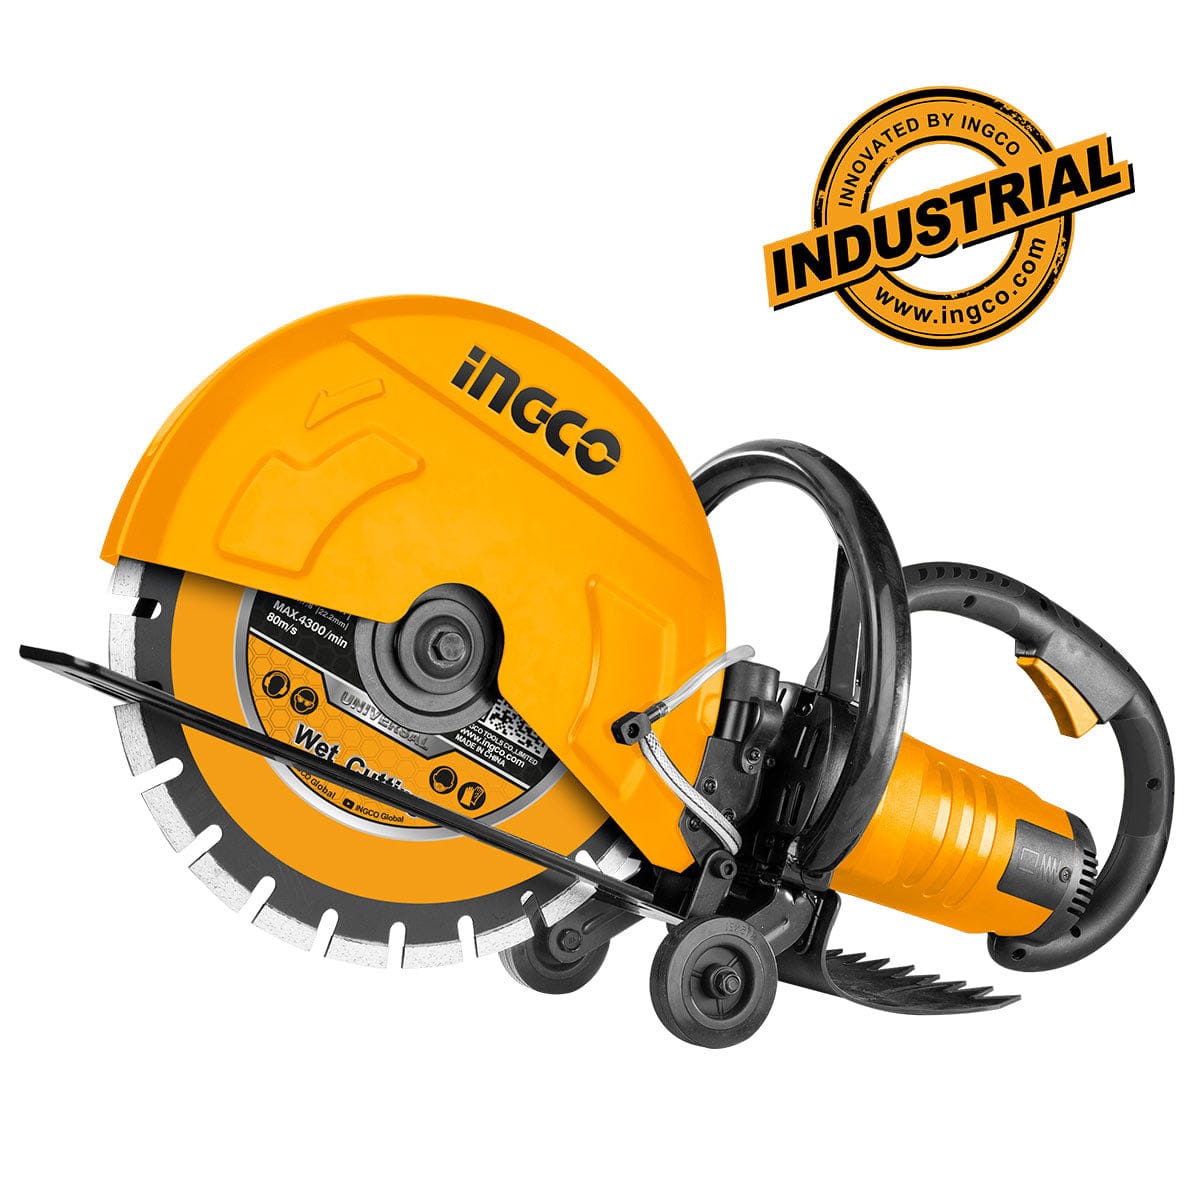 Ingco Power Cutter 2800W - PC3558 | Supply Master | Accra, Ghana Bench & Stationary Tool Buy Tools hardware Building materials